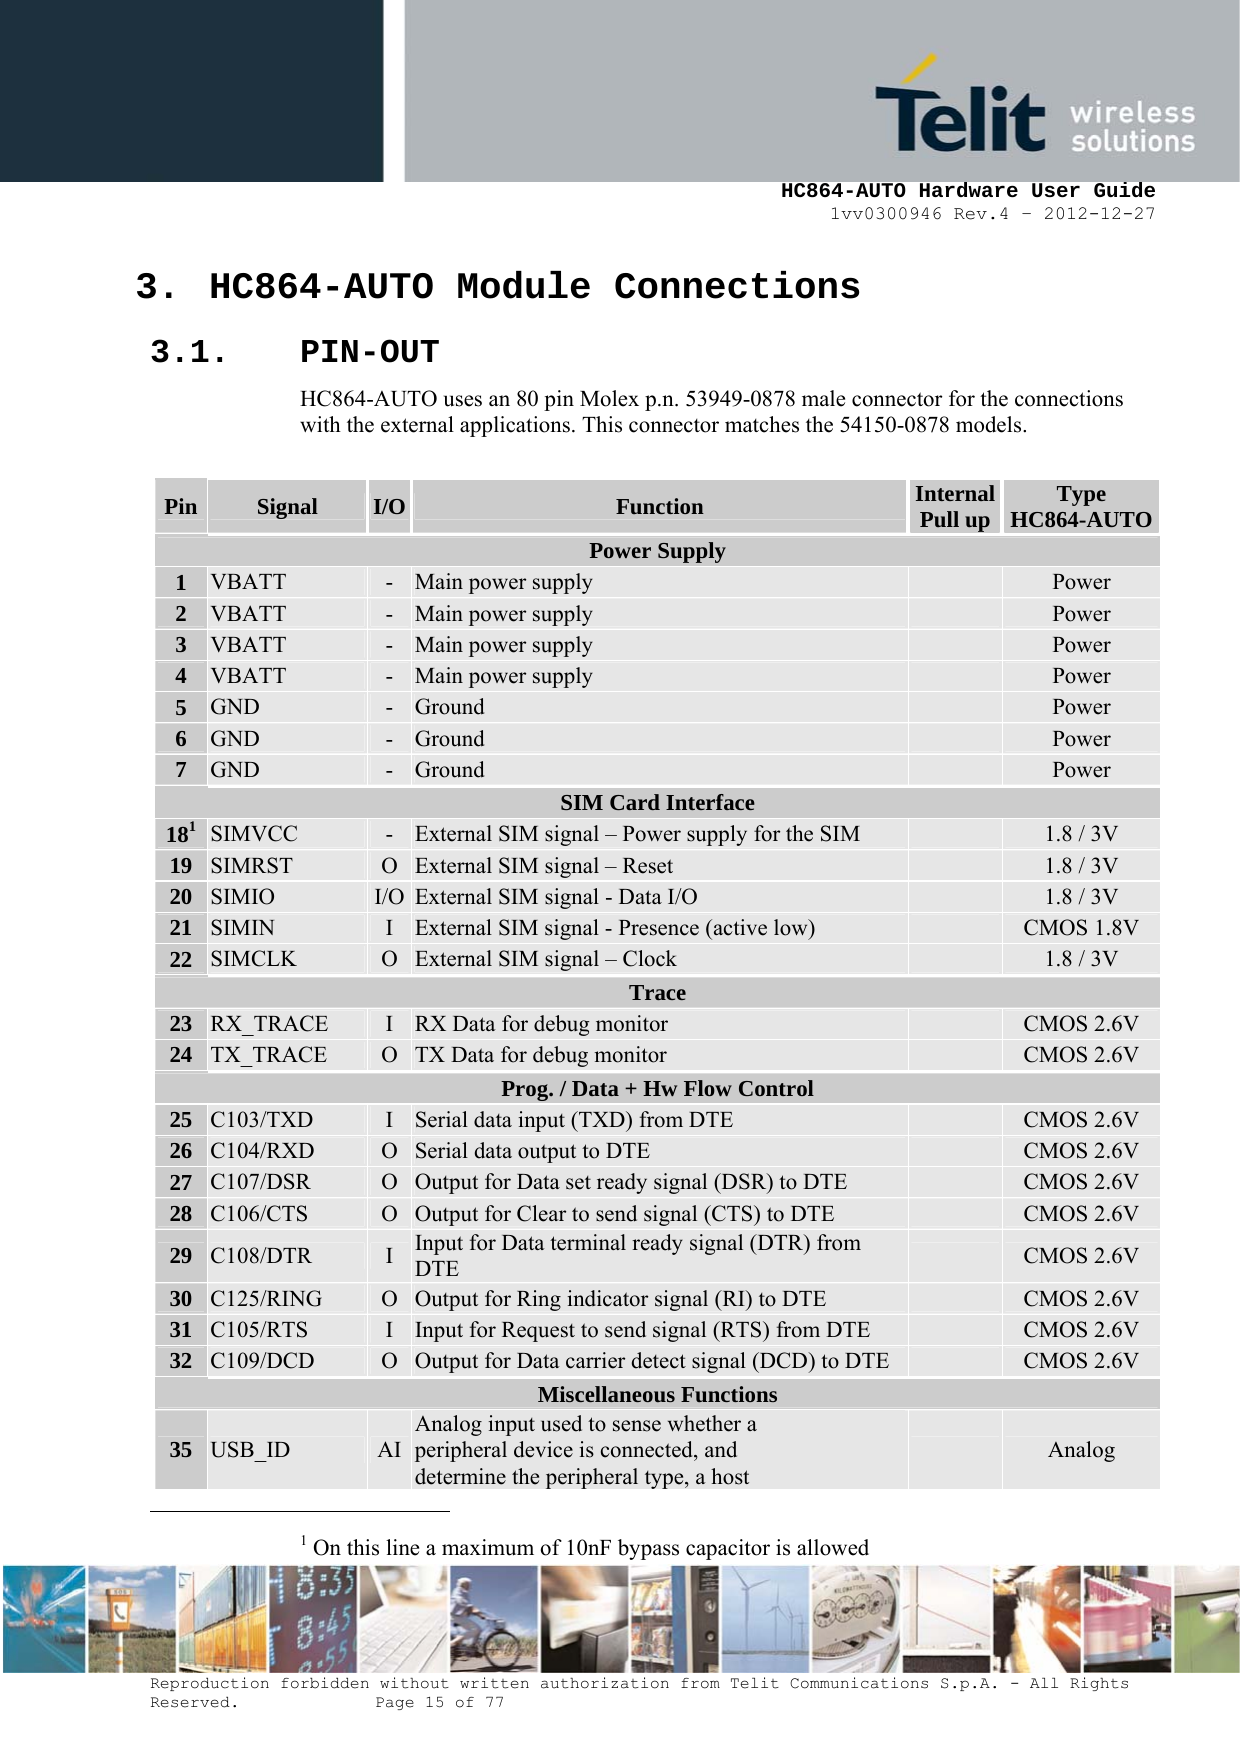     HC864-AUTO Hardware User Guide 1vv0300946 Rev.4 – 2012-12-27 Reproduction forbidden without written authorization from Telit Communications S.p.A. - All Rights Reserved.    Page 15 of 77  3. HC864-AUTO Module Connections 3.1. PIN-OUT HC864-AUTO uses an 80 pin Molex p.n. 53949-0878 male connector for the connections with the external applications. This connector matches the 54150-0878 models.  Pin  Signal  I/O  Function  Internal Pull up  Type HC864-AUTO Power Supply 1  VBATT  -  Main power supply   Power 2  VBATT  -  Main power supply   Power 3  VBATT  -  Main power supply   Power 4  VBATT  -  Main power supply   Power 5  GND  -  Ground   Power 6  GND  -  Ground   Power 7  GND  -  Ground   Power SIM Card Interface 181 SIMVCC  -  External SIM signal – Power supply for the SIM   1.8 / 3V 19  SIMRST  O  External SIM signal – Reset   1.8 / 3V 20  SIMIO  I/O  External SIM signal - Data I/O   1.8 / 3V 21  SIMIN  I  External SIM signal - Presence (active low)   CMOS 1.8V 22  SIMCLK  O  External SIM signal – Clock   1.8 / 3V Trace 23  RX_TRACE  I  RX Data for debug monitor   CMOS 2.6V 24  TX_TRACE  O  TX Data for debug monitor   CMOS 2.6V Prog. / Data + Hw Flow Control 25  C103/TXD  I  Serial data input (TXD) from DTE   CMOS 2.6V 26  C104/RXD  O  Serial data output to DTE   CMOS 2.6V 27  C107/DSR  O  Output for Data set ready signal (DSR) to DTE   CMOS 2.6V 28  C106/CTS  O  Output for Clear to send signal (CTS) to DTE   CMOS 2.6V 29  C108/DTR  I  Input for Data terminal ready signal (DTR) from DTE   CMOS 2.6V 30  C125/RING  O  Output for Ring indicator signal (RI) to DTE   CMOS 2.6V 31  C105/RTS  I  Input for Request to send signal (RTS) from DTE   CMOS 2.6V 32  C109/DCD  O  Output for Data carrier detect signal (DCD) to DTE   CMOS 2.6V Miscellaneous Functions 35  USB_ID  AI Analog input used to sense whether a peripheral device is connected, and  determine the peripheral type, a host   Analog                                                       1 On this line a maximum of 10nF bypass capacitor is allowed 